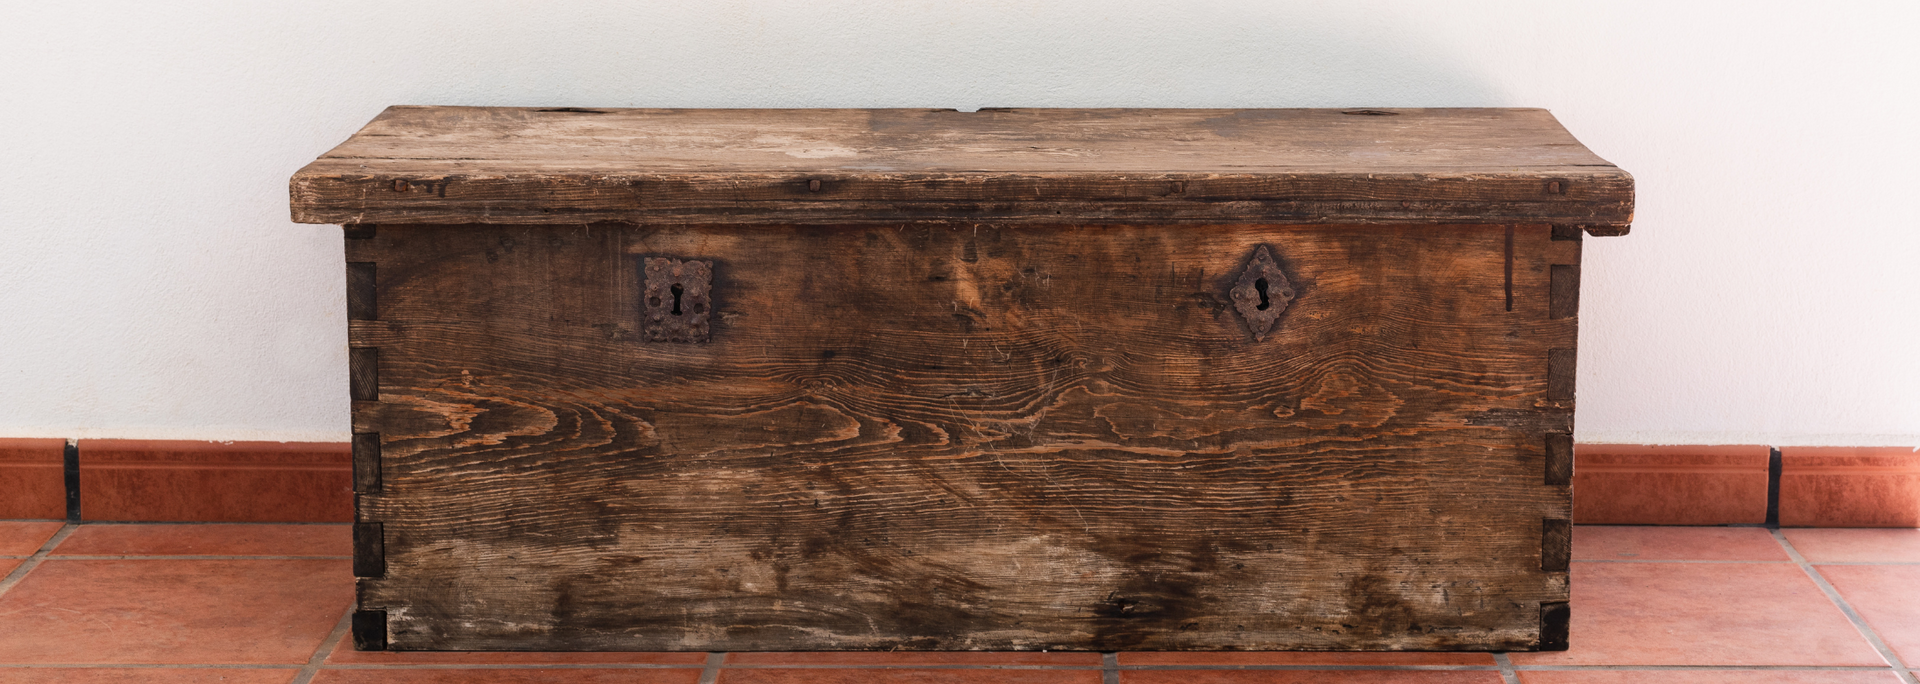 Picture of an old wooden casket